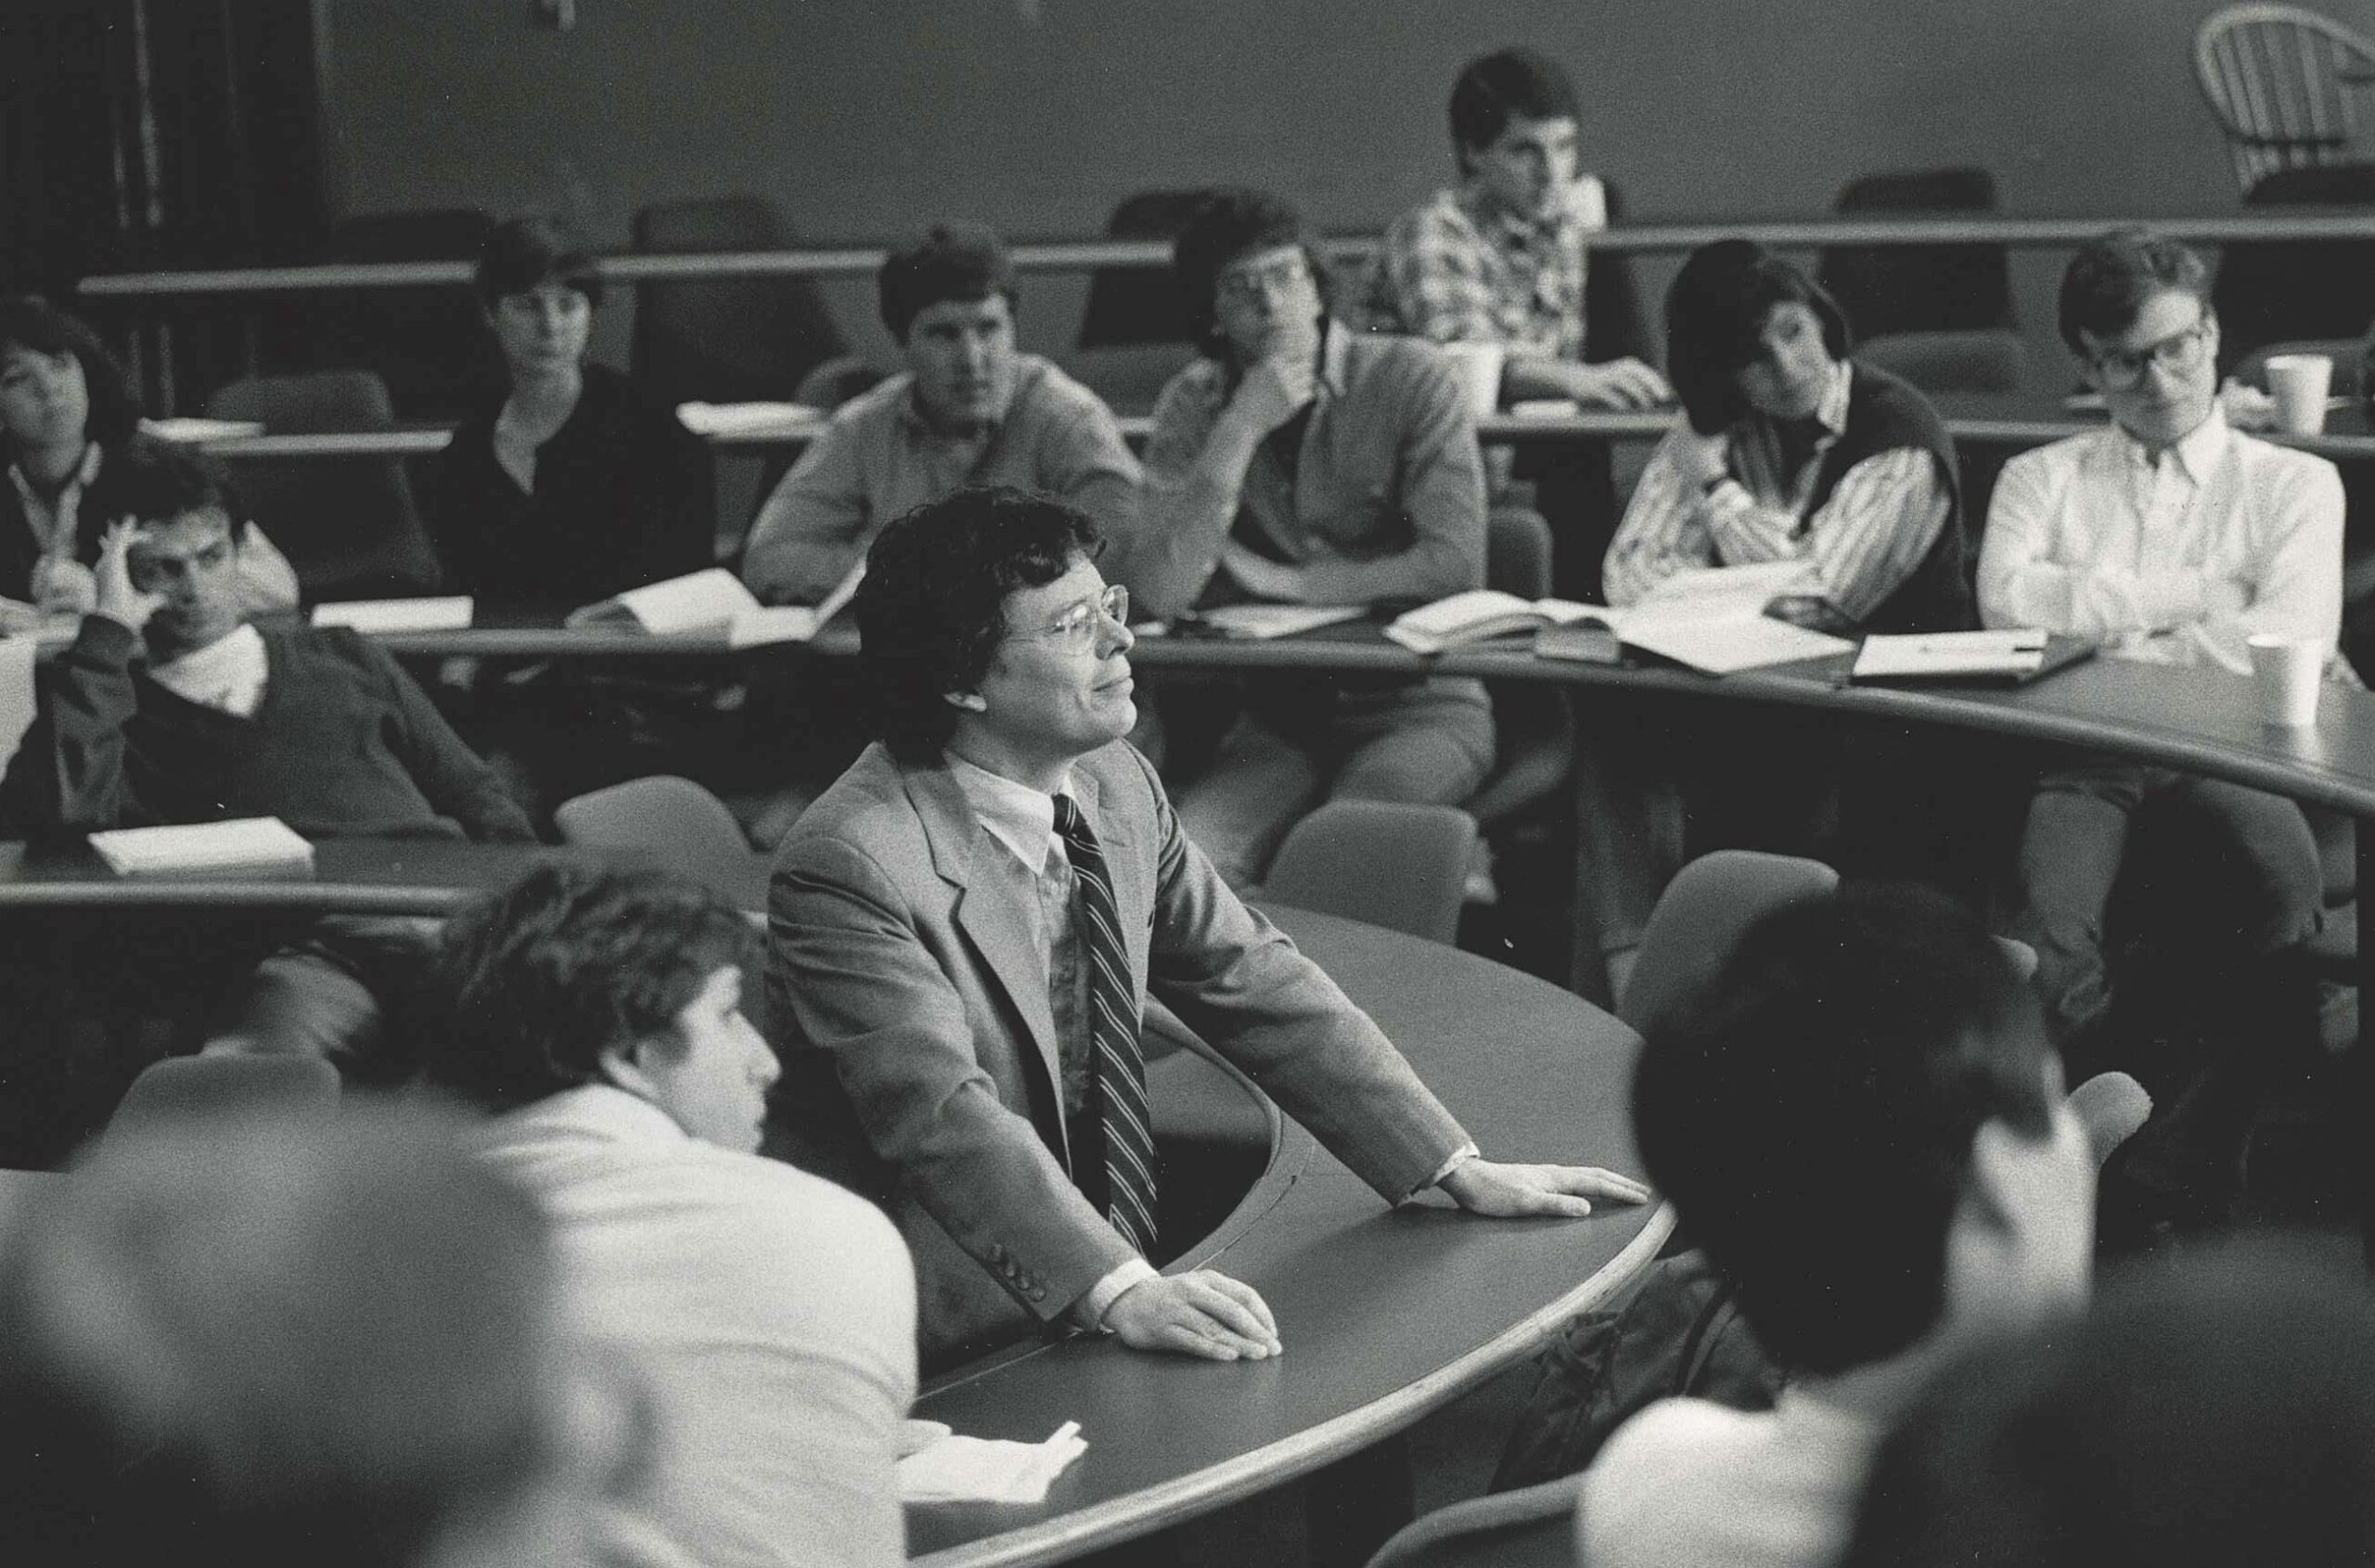 Mark Moore, smiling, stands in the middle of a classroom with students sitting around him on all sides